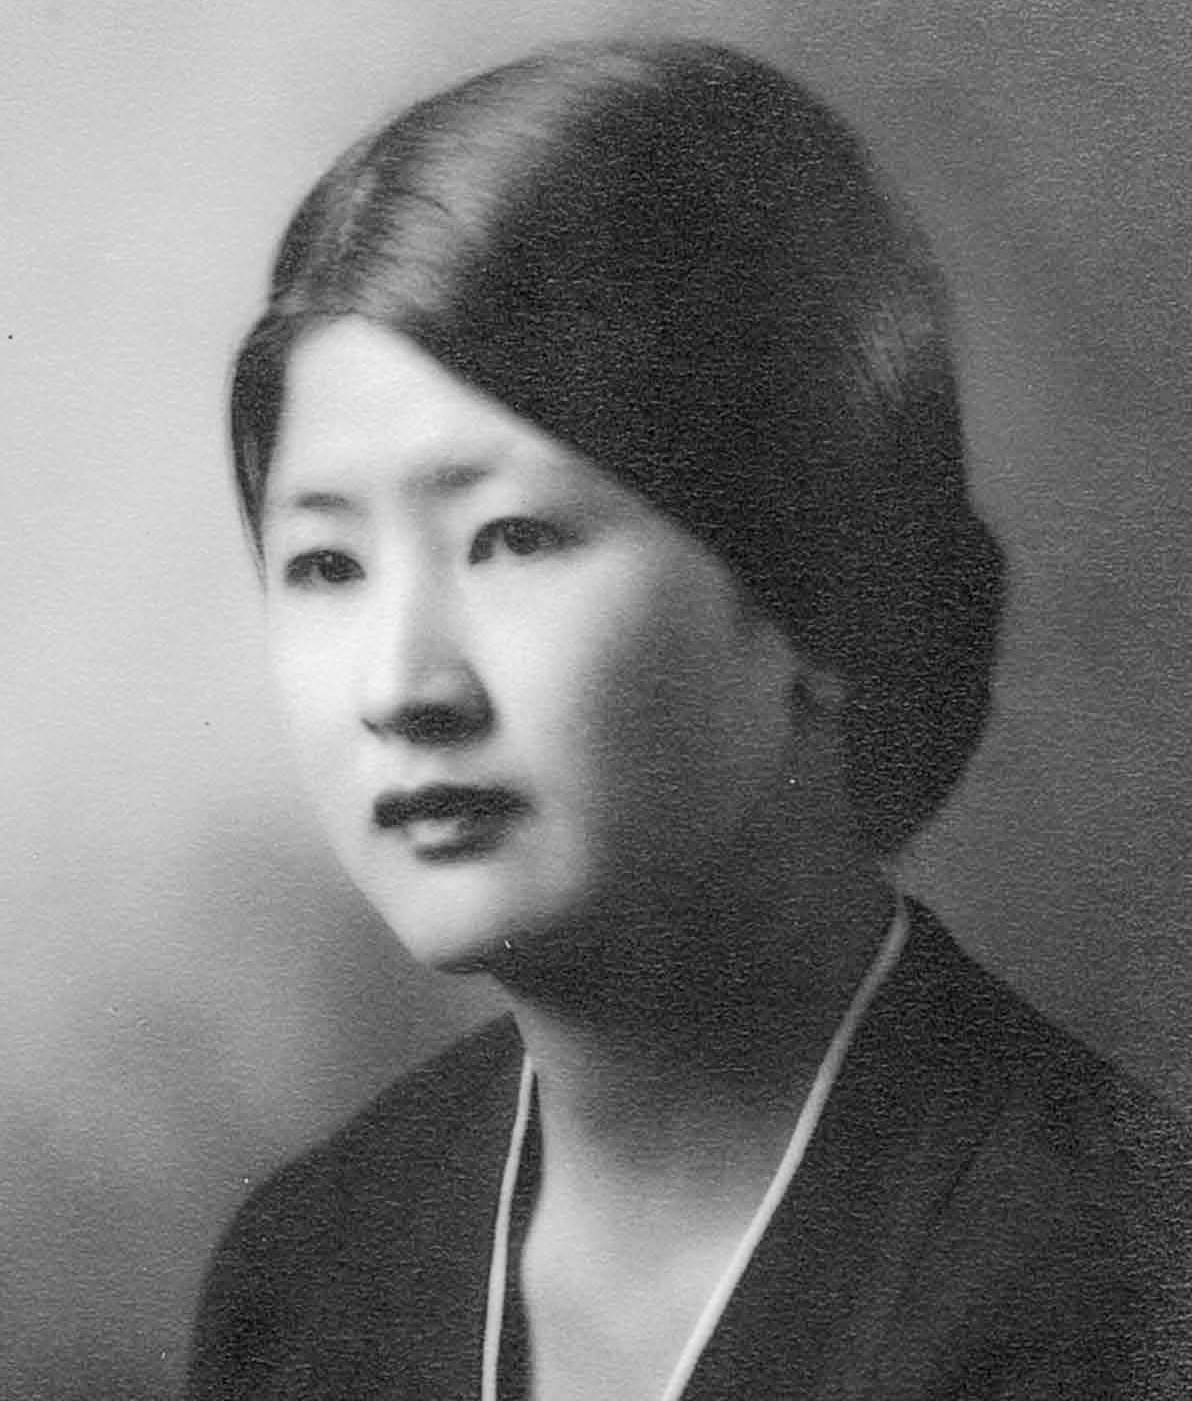 REBECCA LEE PROCTOR, M.D. December 26, 1905 – April 10, 1985 “All Work is Honorable” Rebecca Lee was born in Kihei, Maui. Her parents immigrated to Hawaii ... - 0000743712-01-1